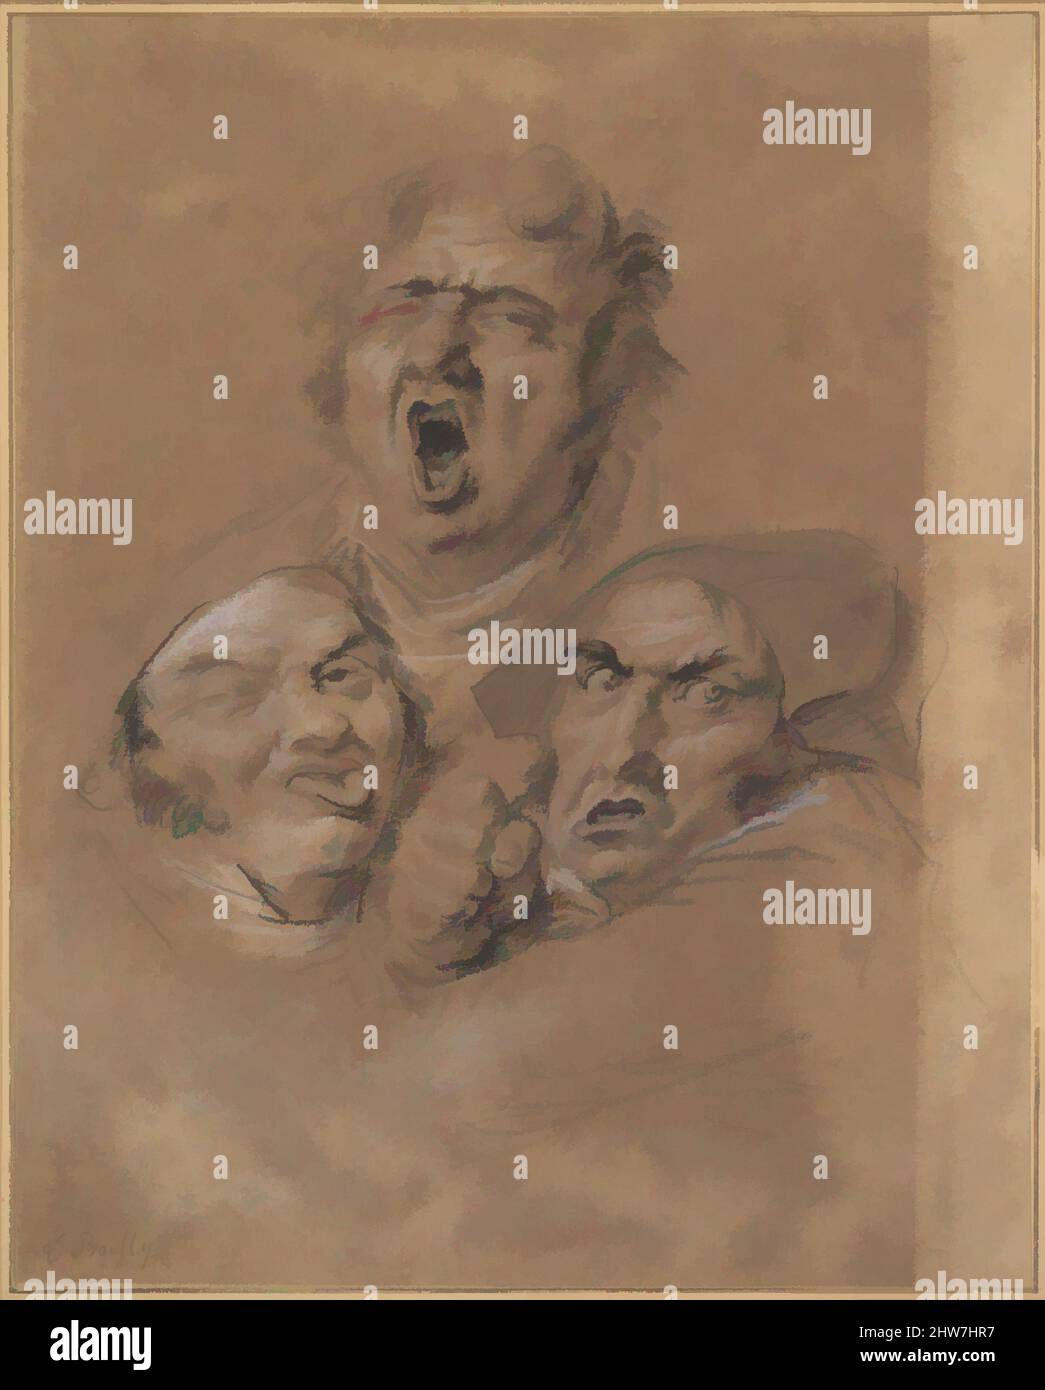 Art inspired by Study of Three Heads, ca. 1823, Black and white chalk, with stumping, sheet: 8 7/8 x 7 1/16 in. (22.6 x 18 cm), Drawings, Louis Léopold Boilly (French, La Bassée 1761–1845 Paris, Classic works modernized by Artotop with a splash of modernity. Shapes, color and value, eye-catching visual impact on art. Emotions through freedom of artworks in a contemporary way. A timeless message pursuing a wildly creative new direction. Artists turning to the digital medium and creating the Artotop NFT Stock Photo